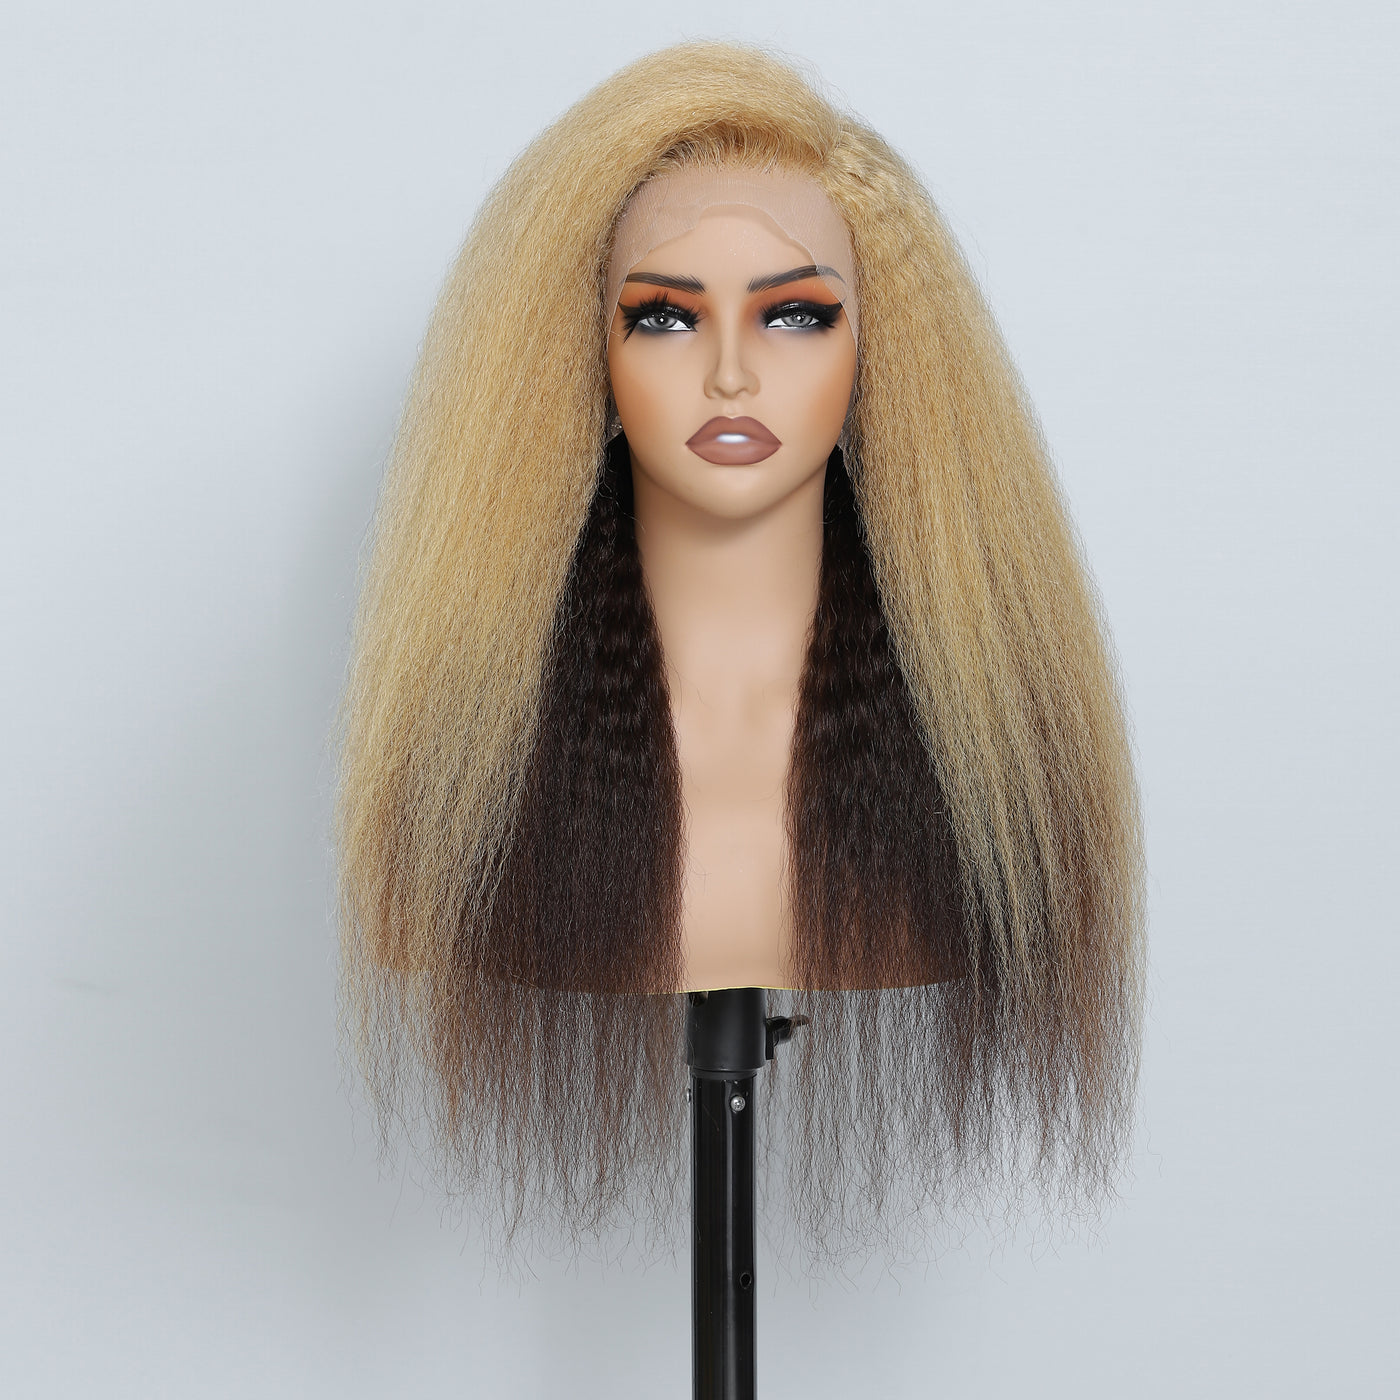 613 Blonde Lace Front Wig Kinky Straight Ombre Colored Human Hair Wigs For Black Women 13x4 Blonde Lace Front Wigs----Geeta Hair